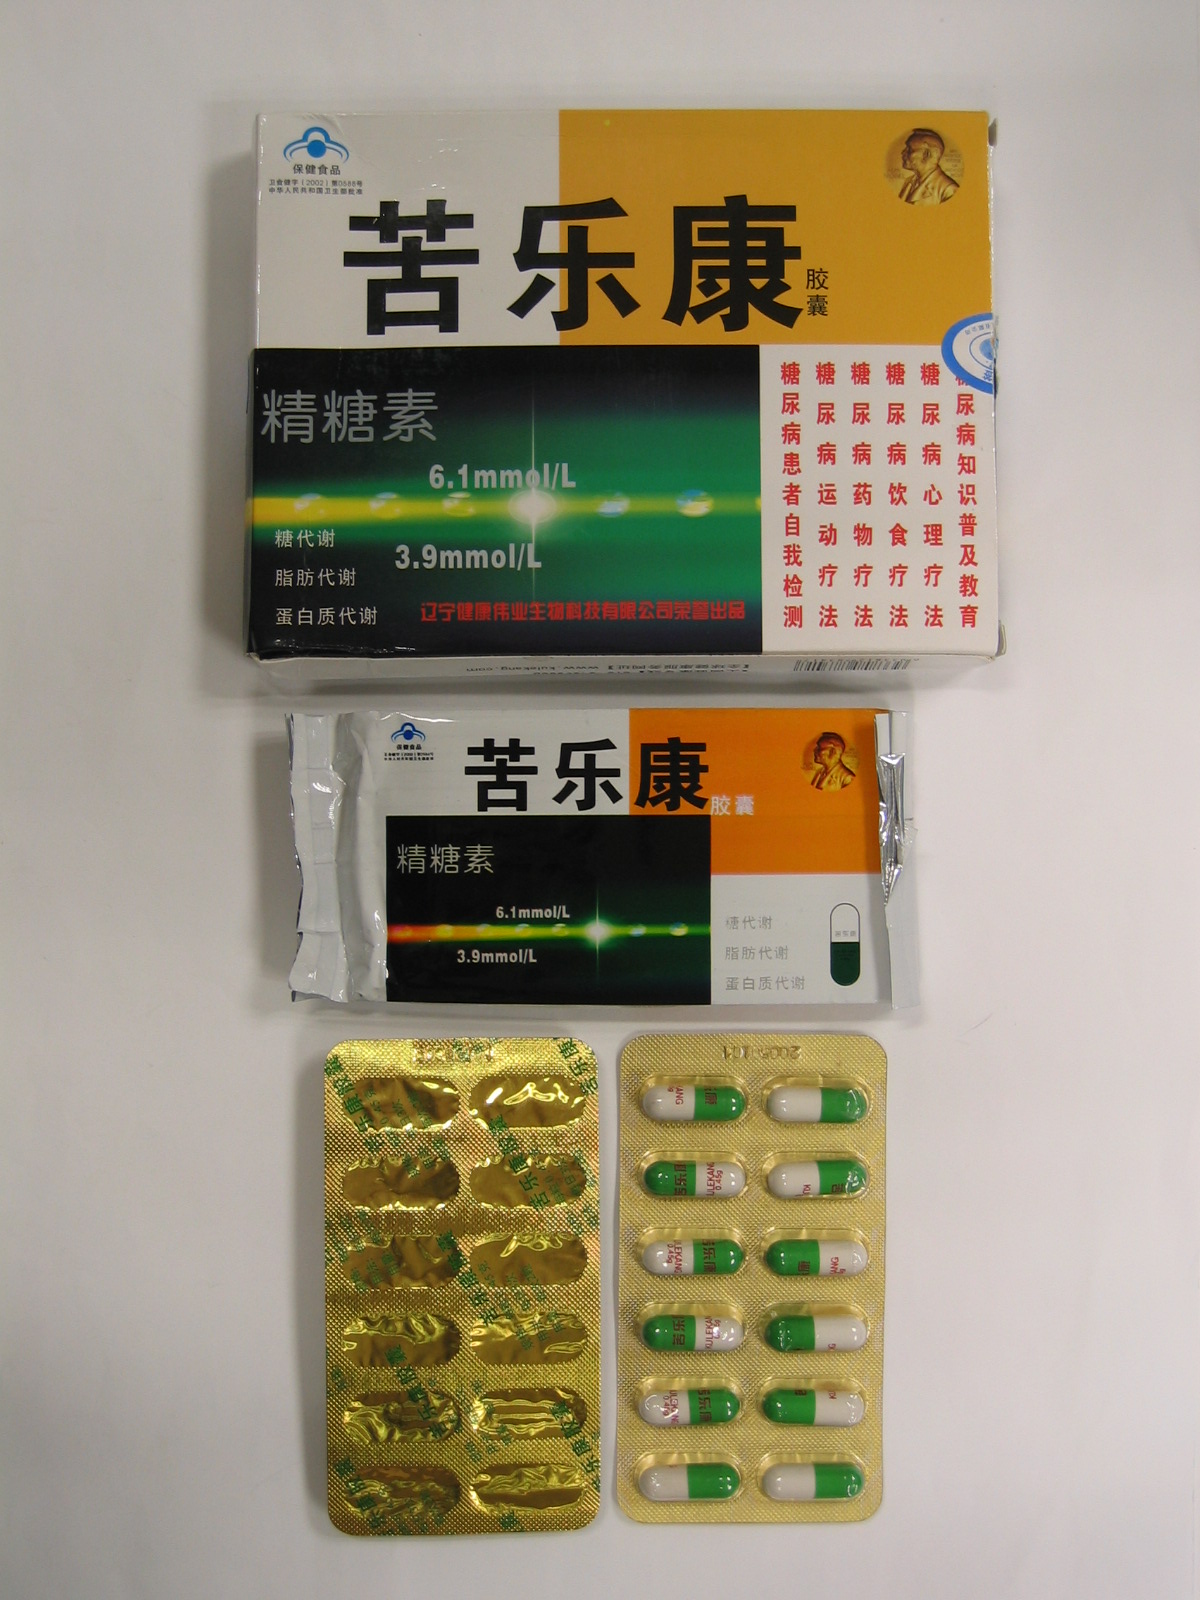 Chinese medicine containing Western drug ingredients, rosiglitazone and phenformin, and may cause side effects such as headache and lower limb swelling. 